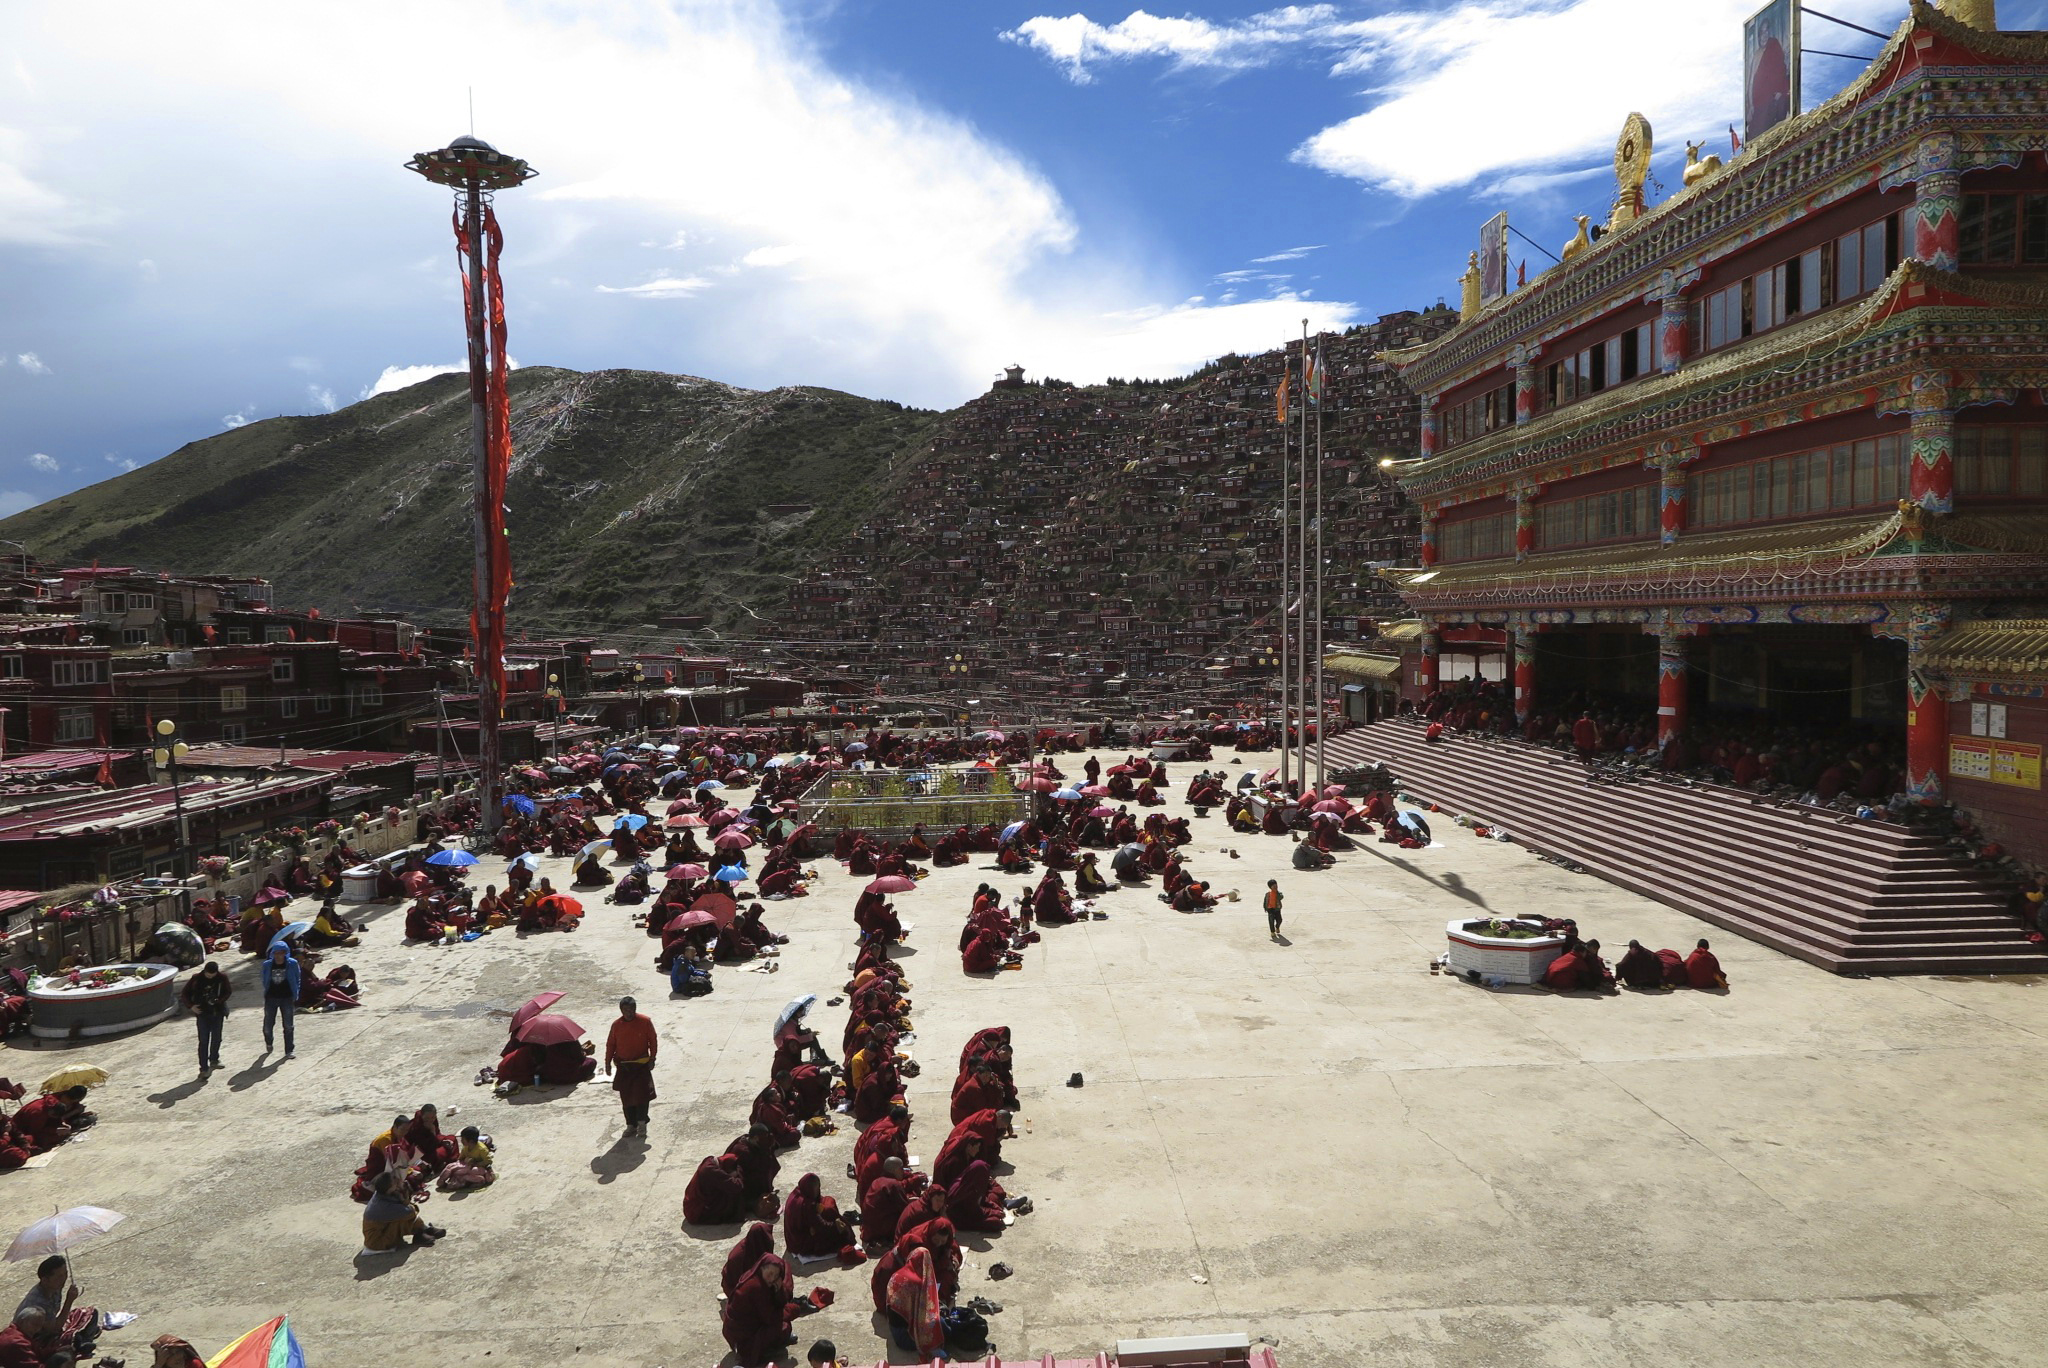 Seda Nunnery, Sichuan, China. Image by Tienlon Ho / Lonely Planet